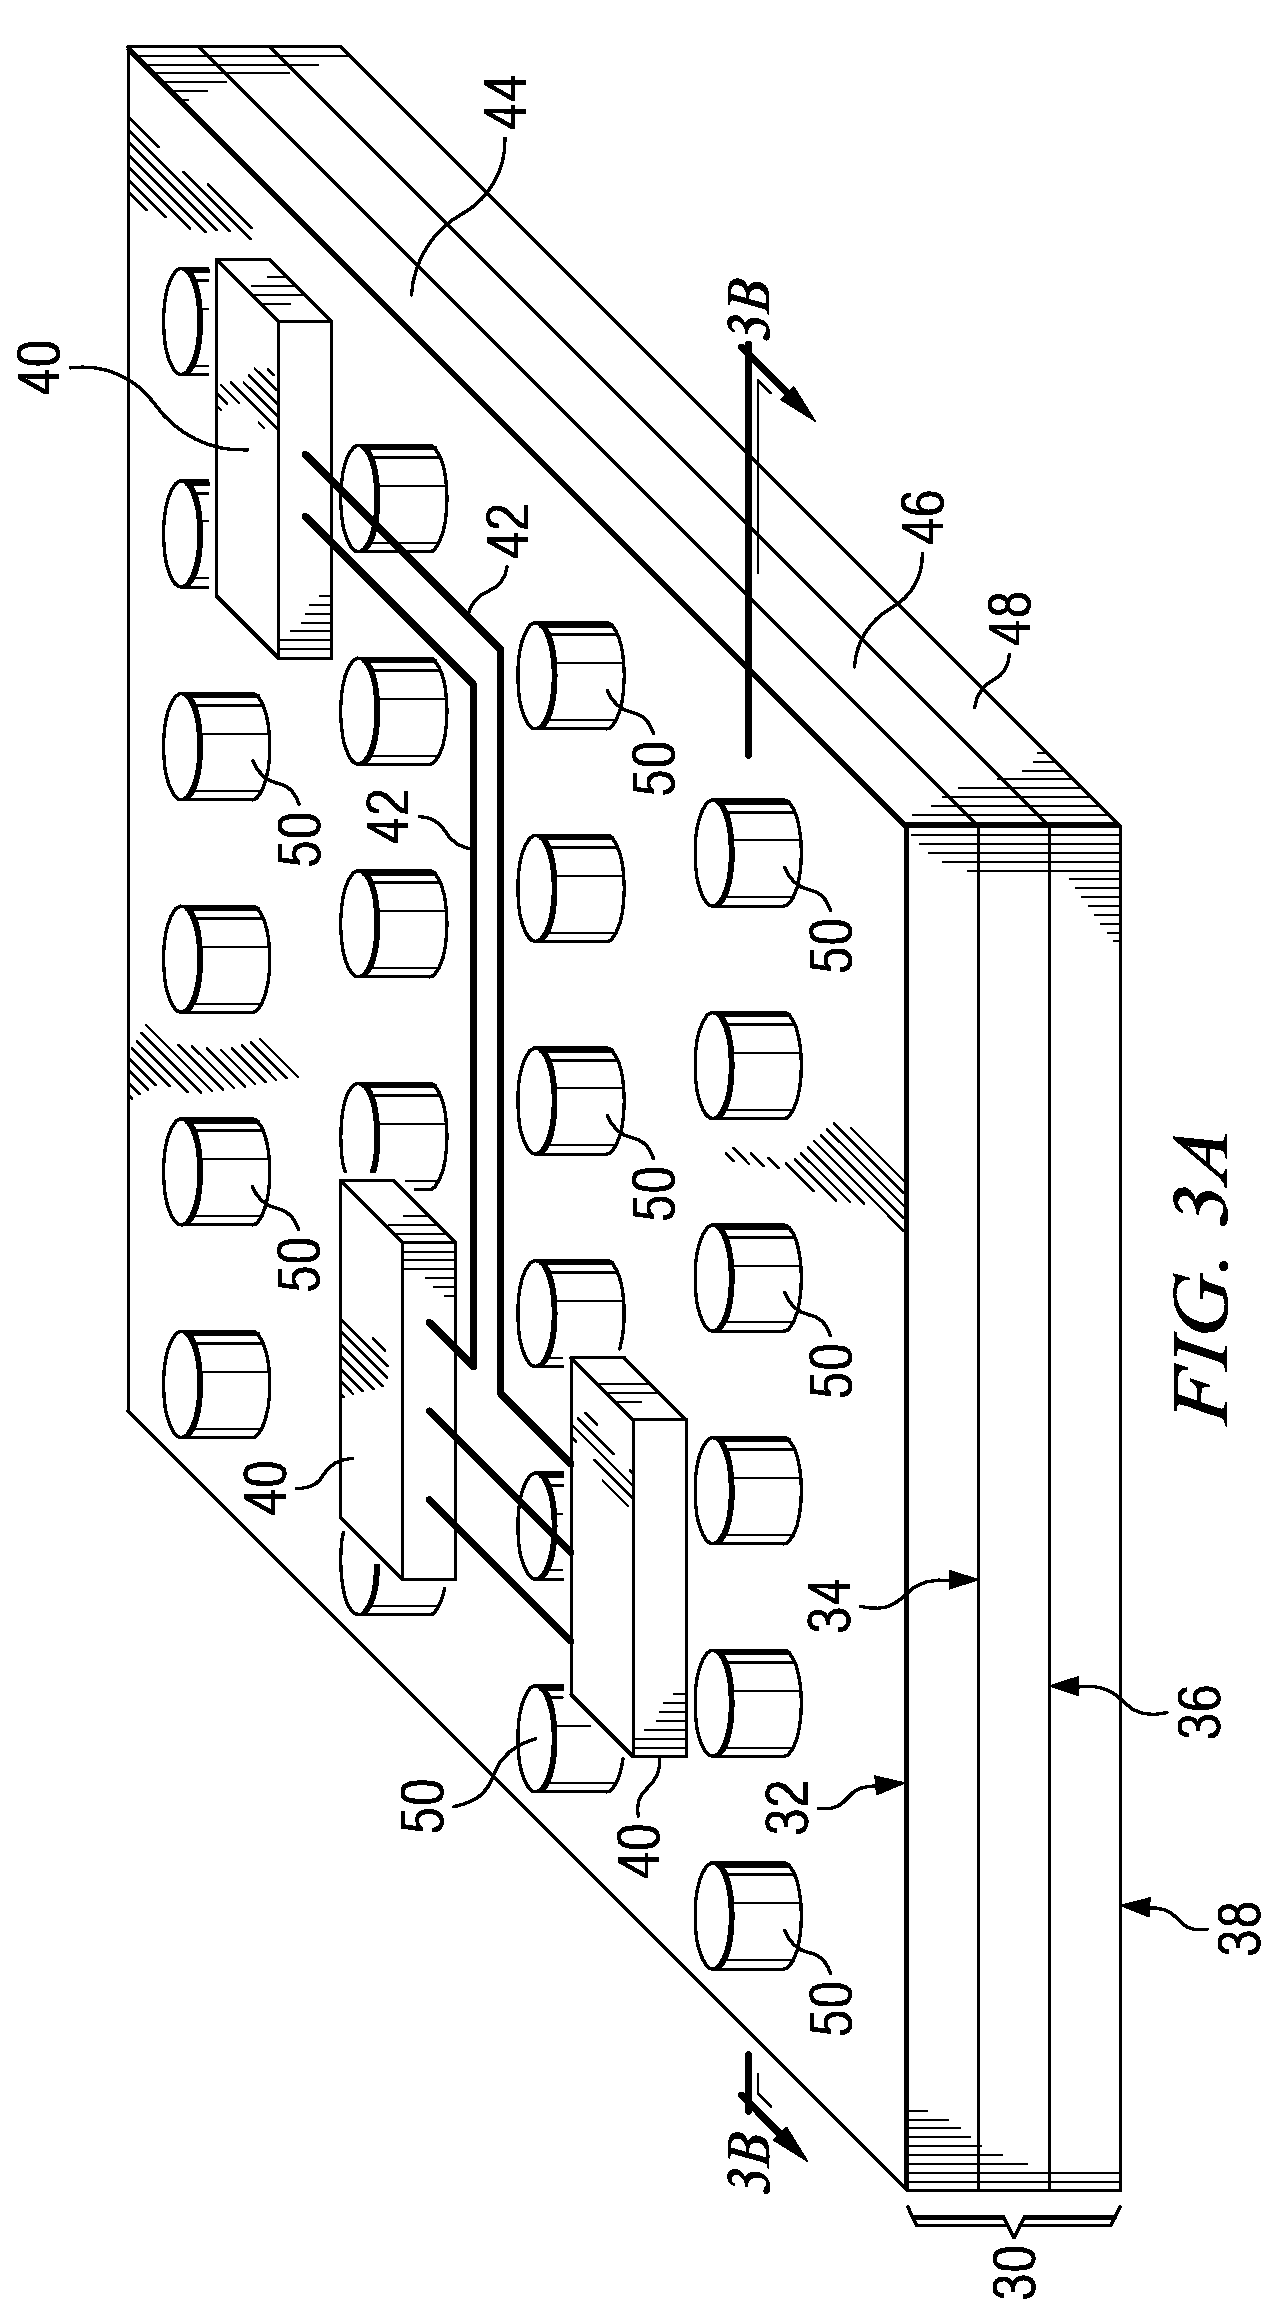 Capacitors with insulating layer having embedded dielectric rods